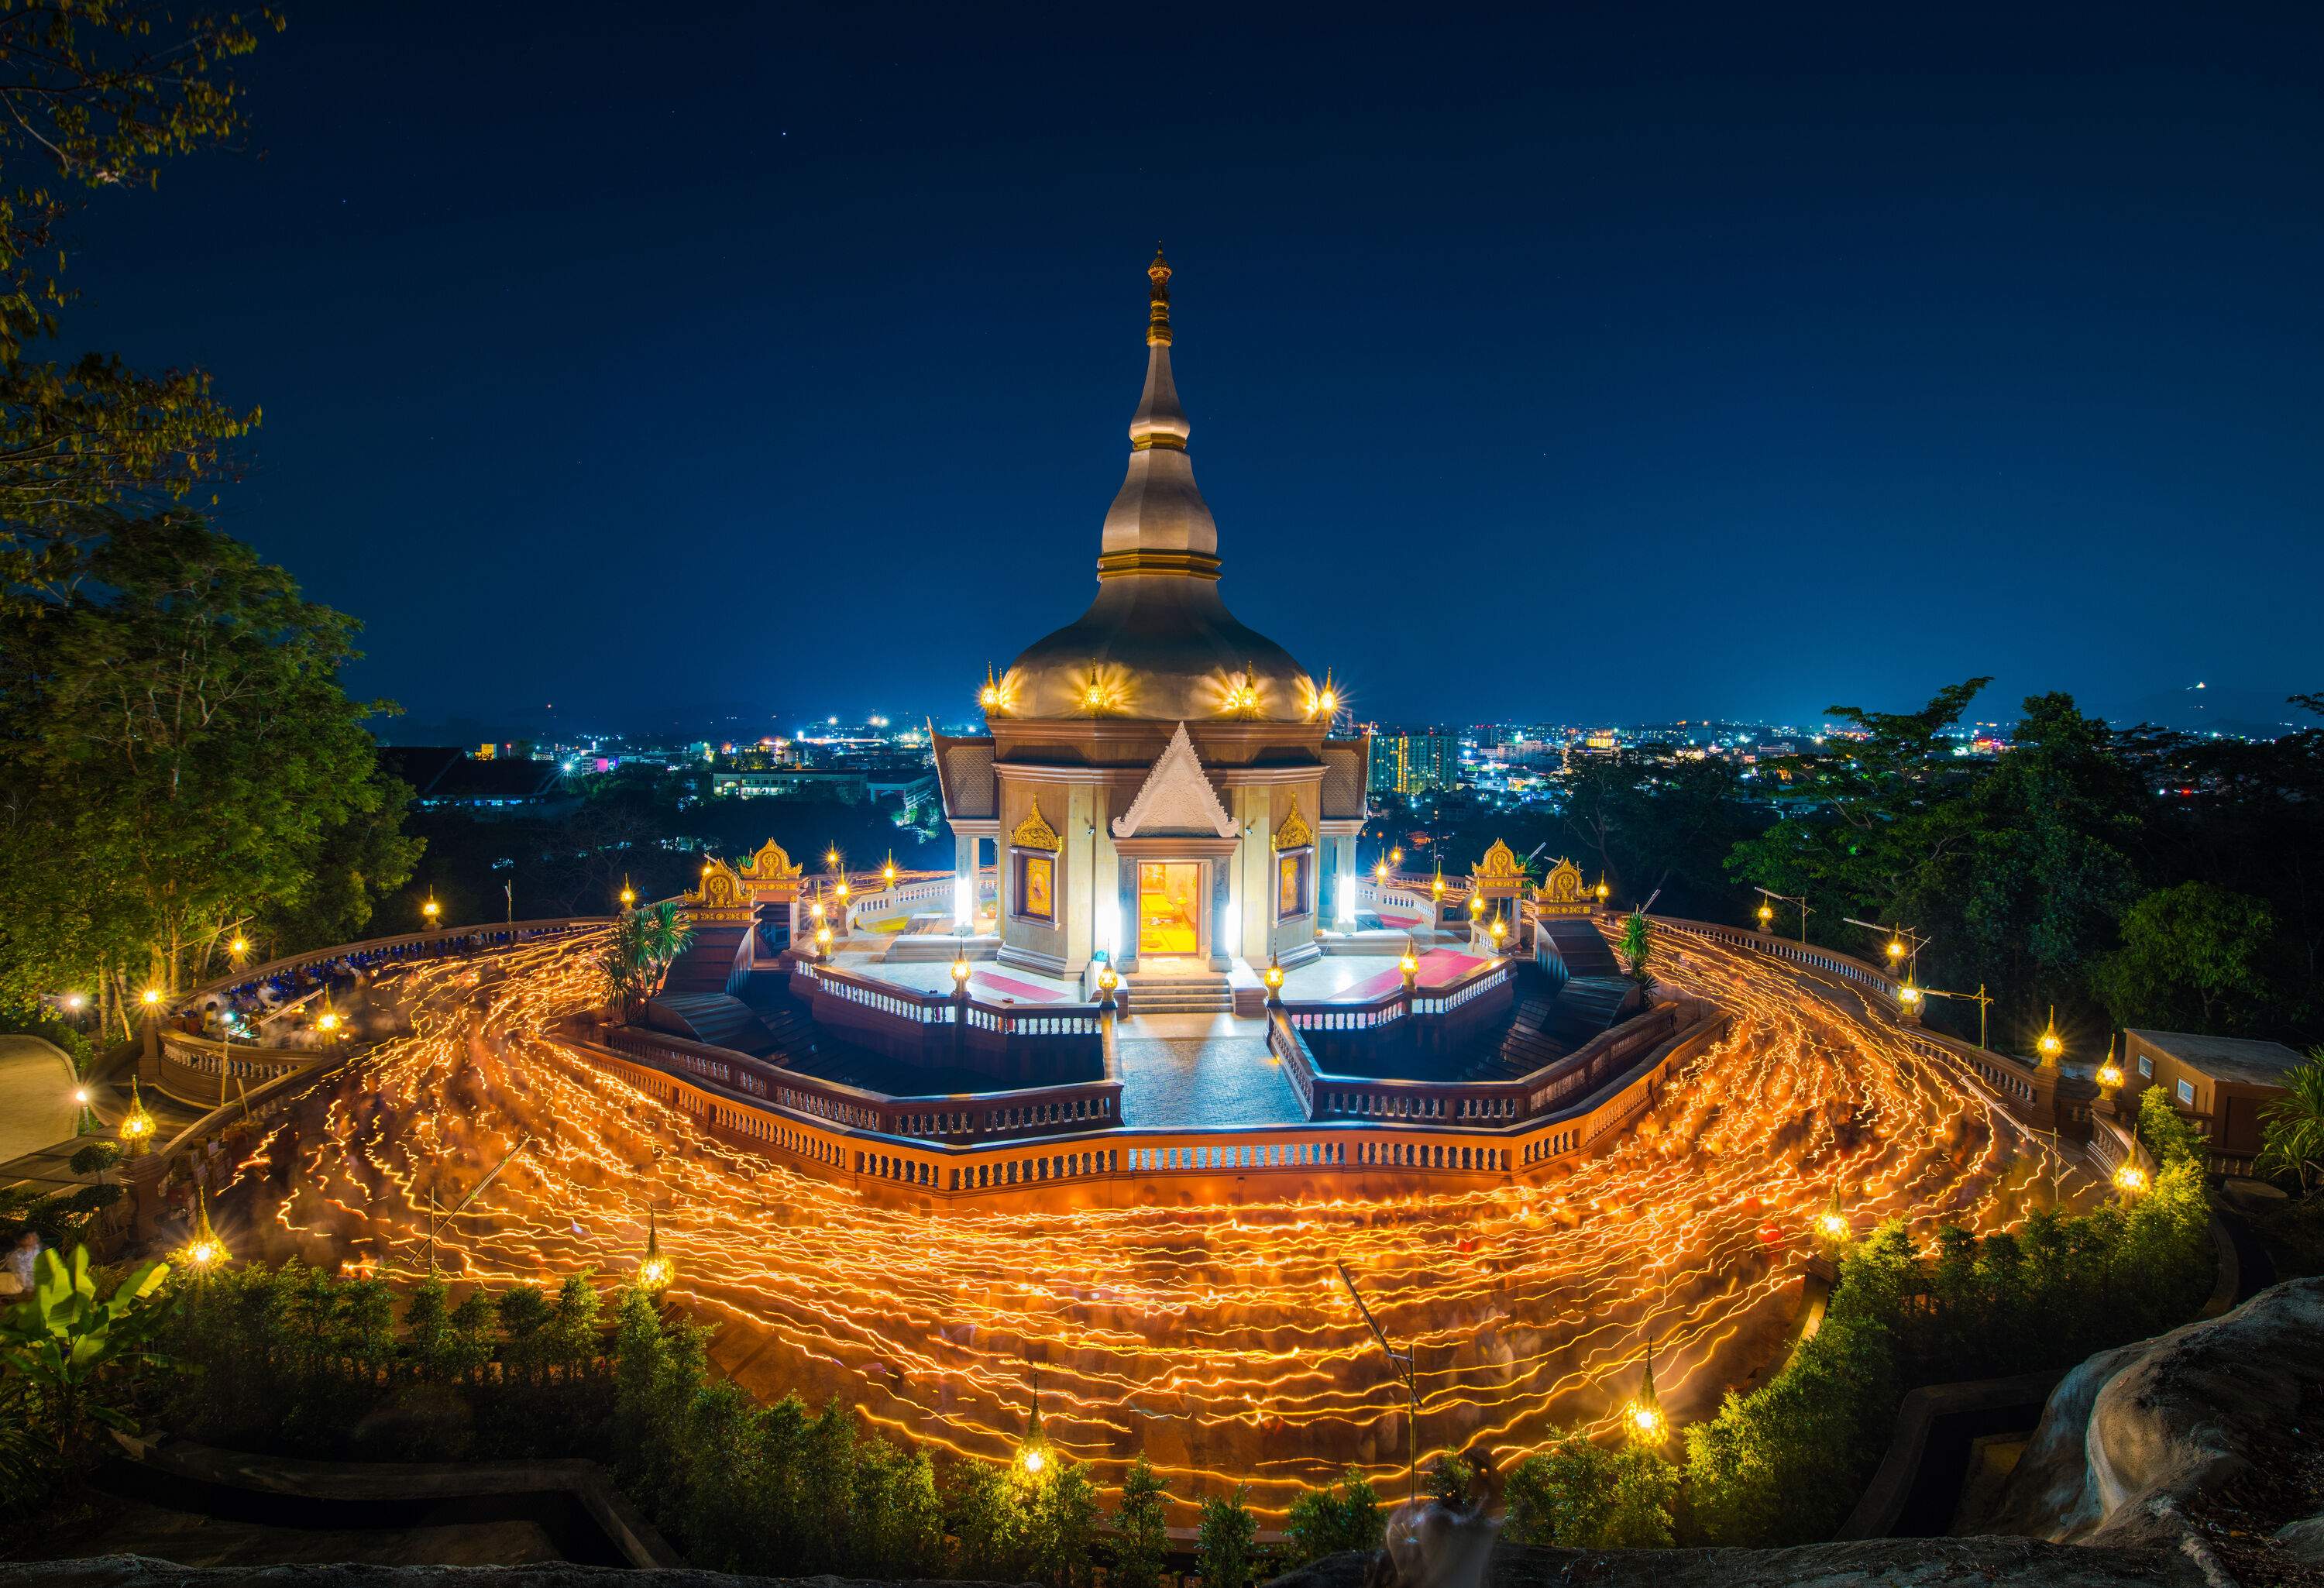 Wat Charoen Samanakij is a temple with a pillared porch and a pointy roof surrounded by streaks of lights at night.